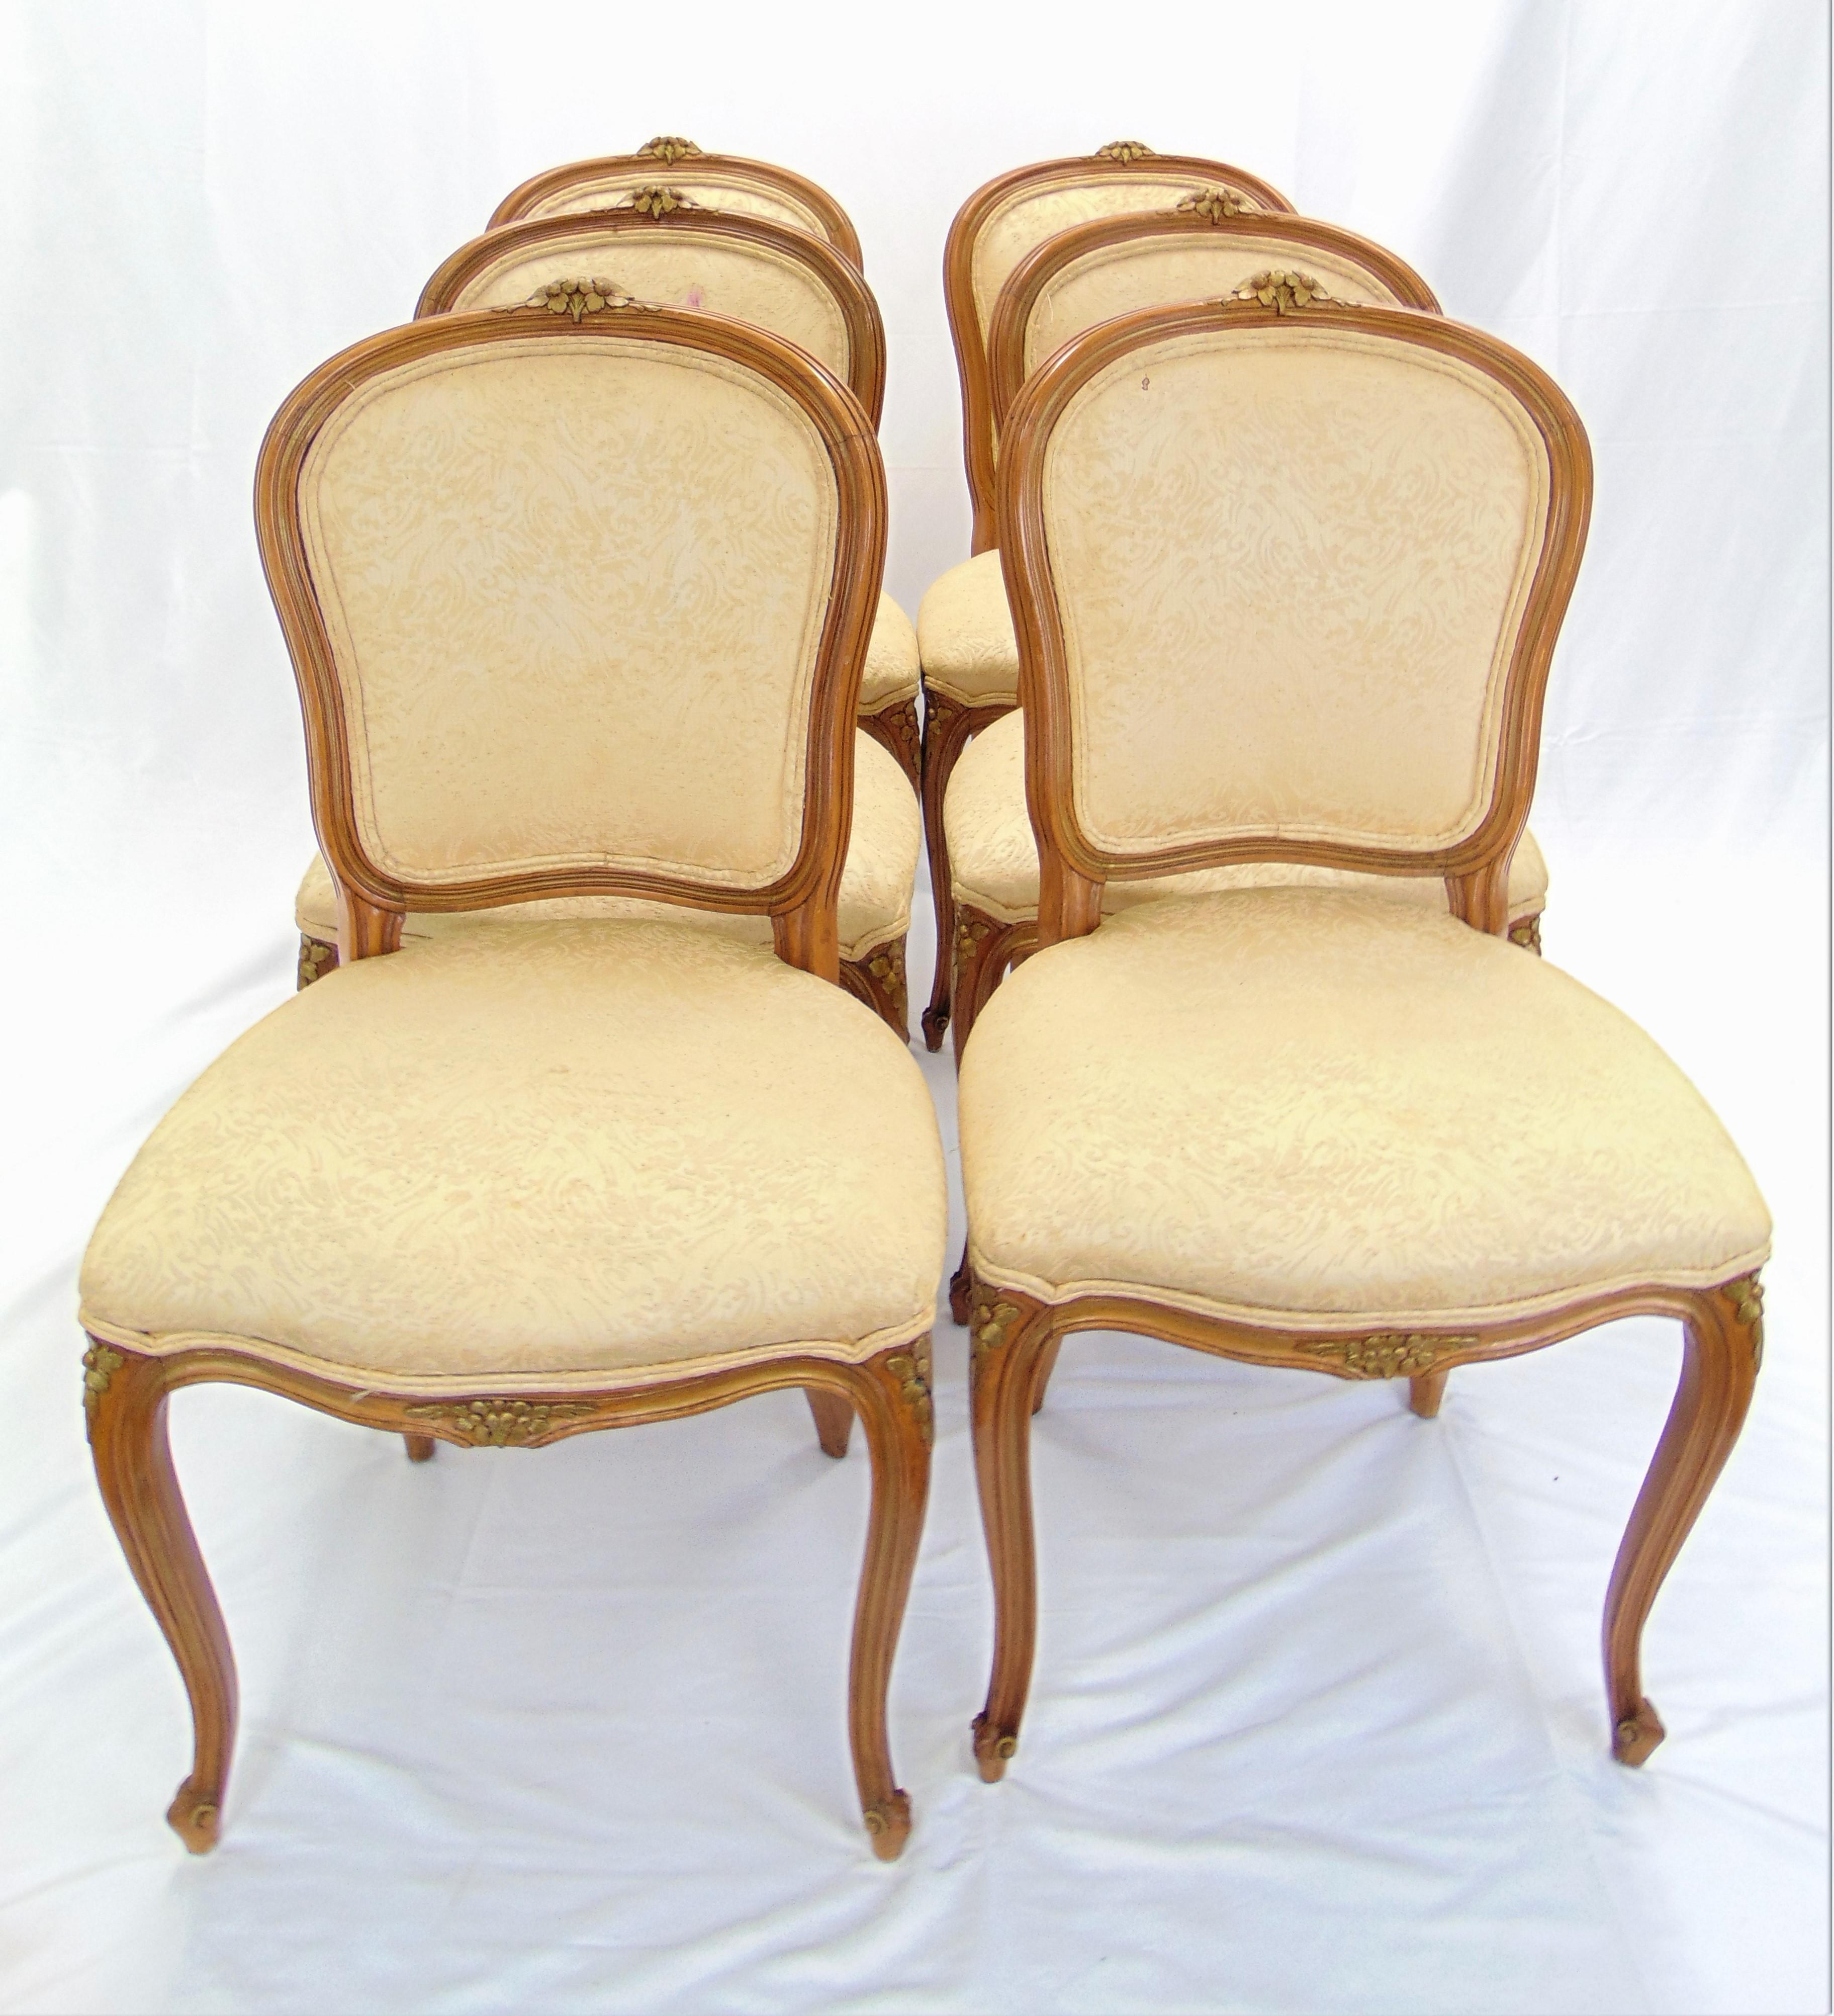 These are a set of 6 vintage Italian dining chairs from the 1960s. They have wonderful hand carved and hand painted detail. All are in very nice structural condition. The chairs show normal signs of age and use. They do need to be reupholstered.